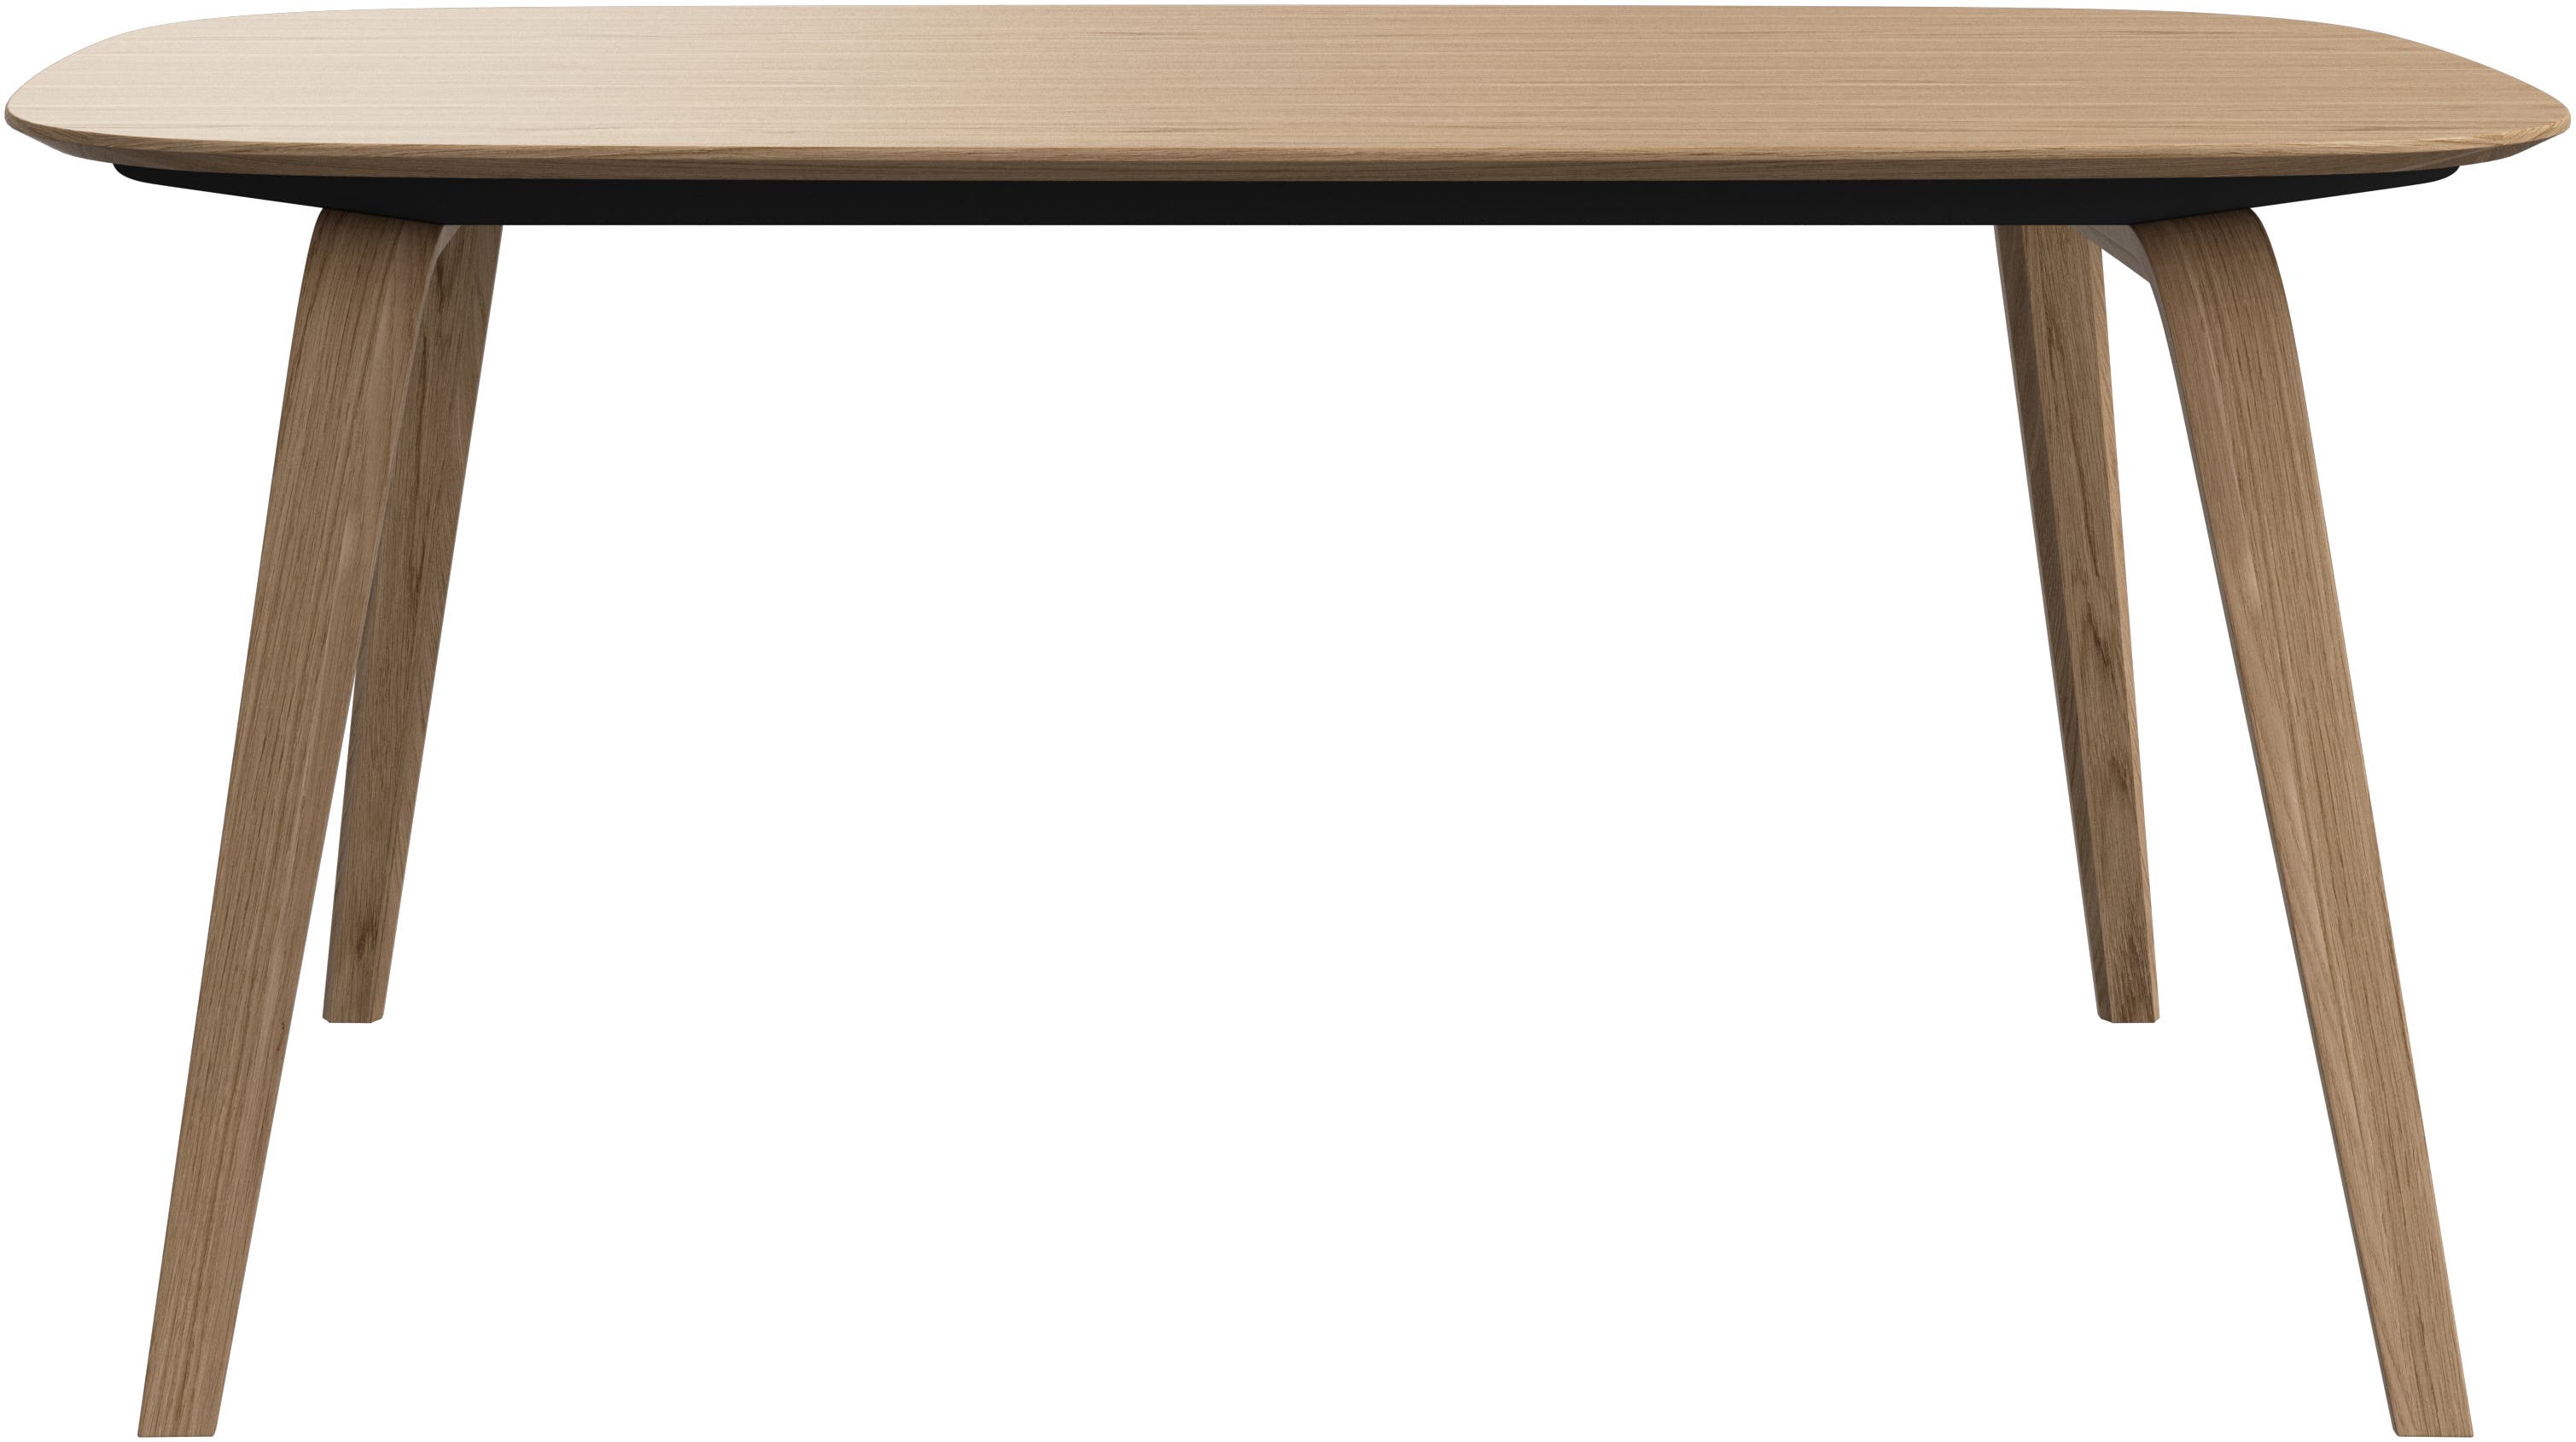 Hauge dining table